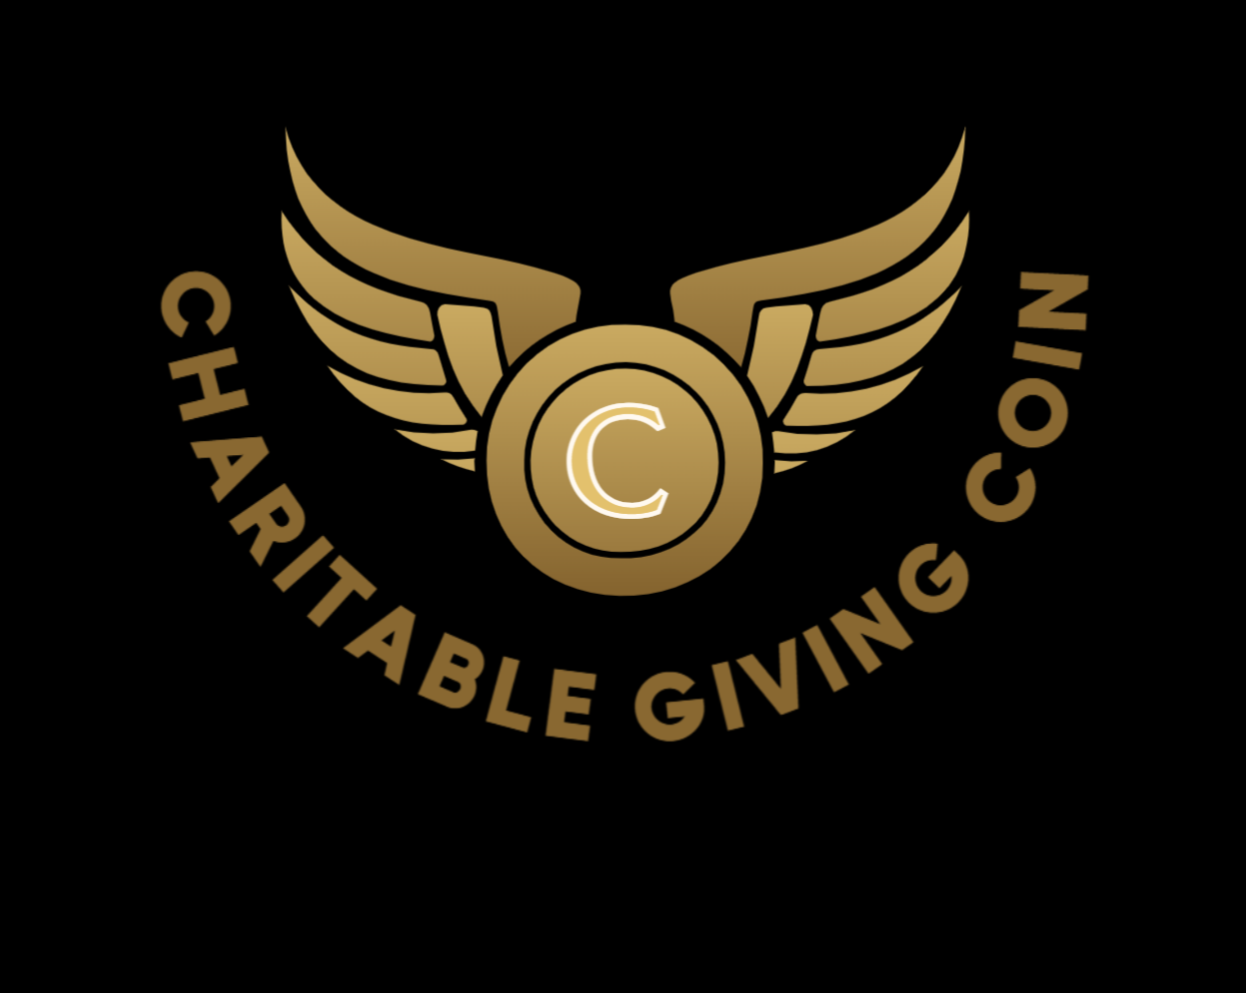 CGC - Charitable Giving Coin